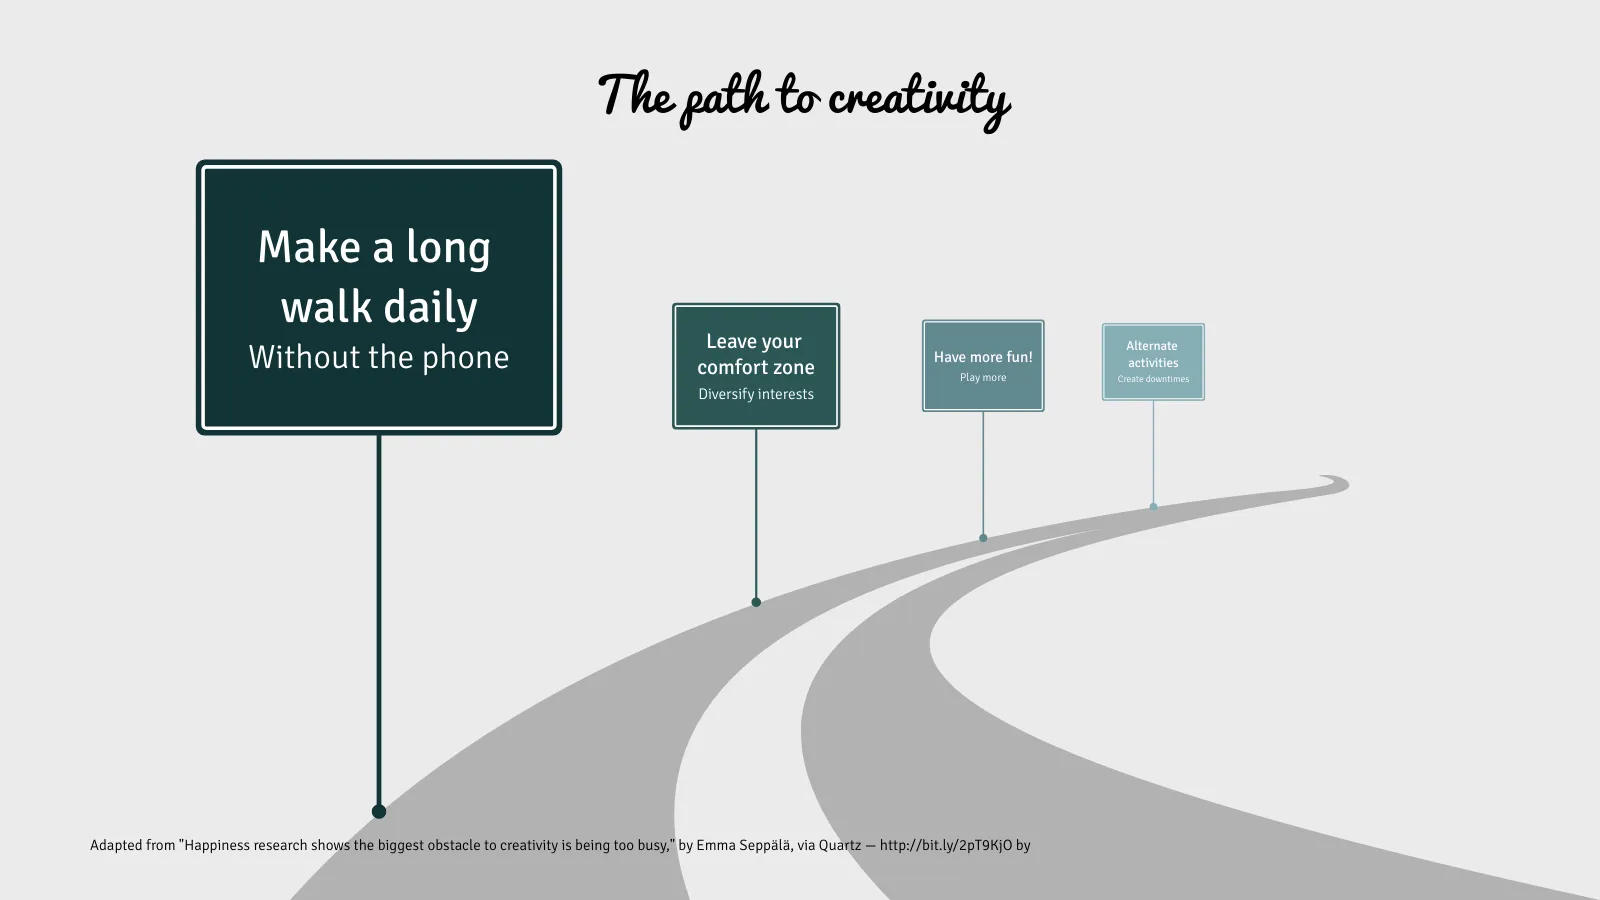 Roadmap example: The path to creativity